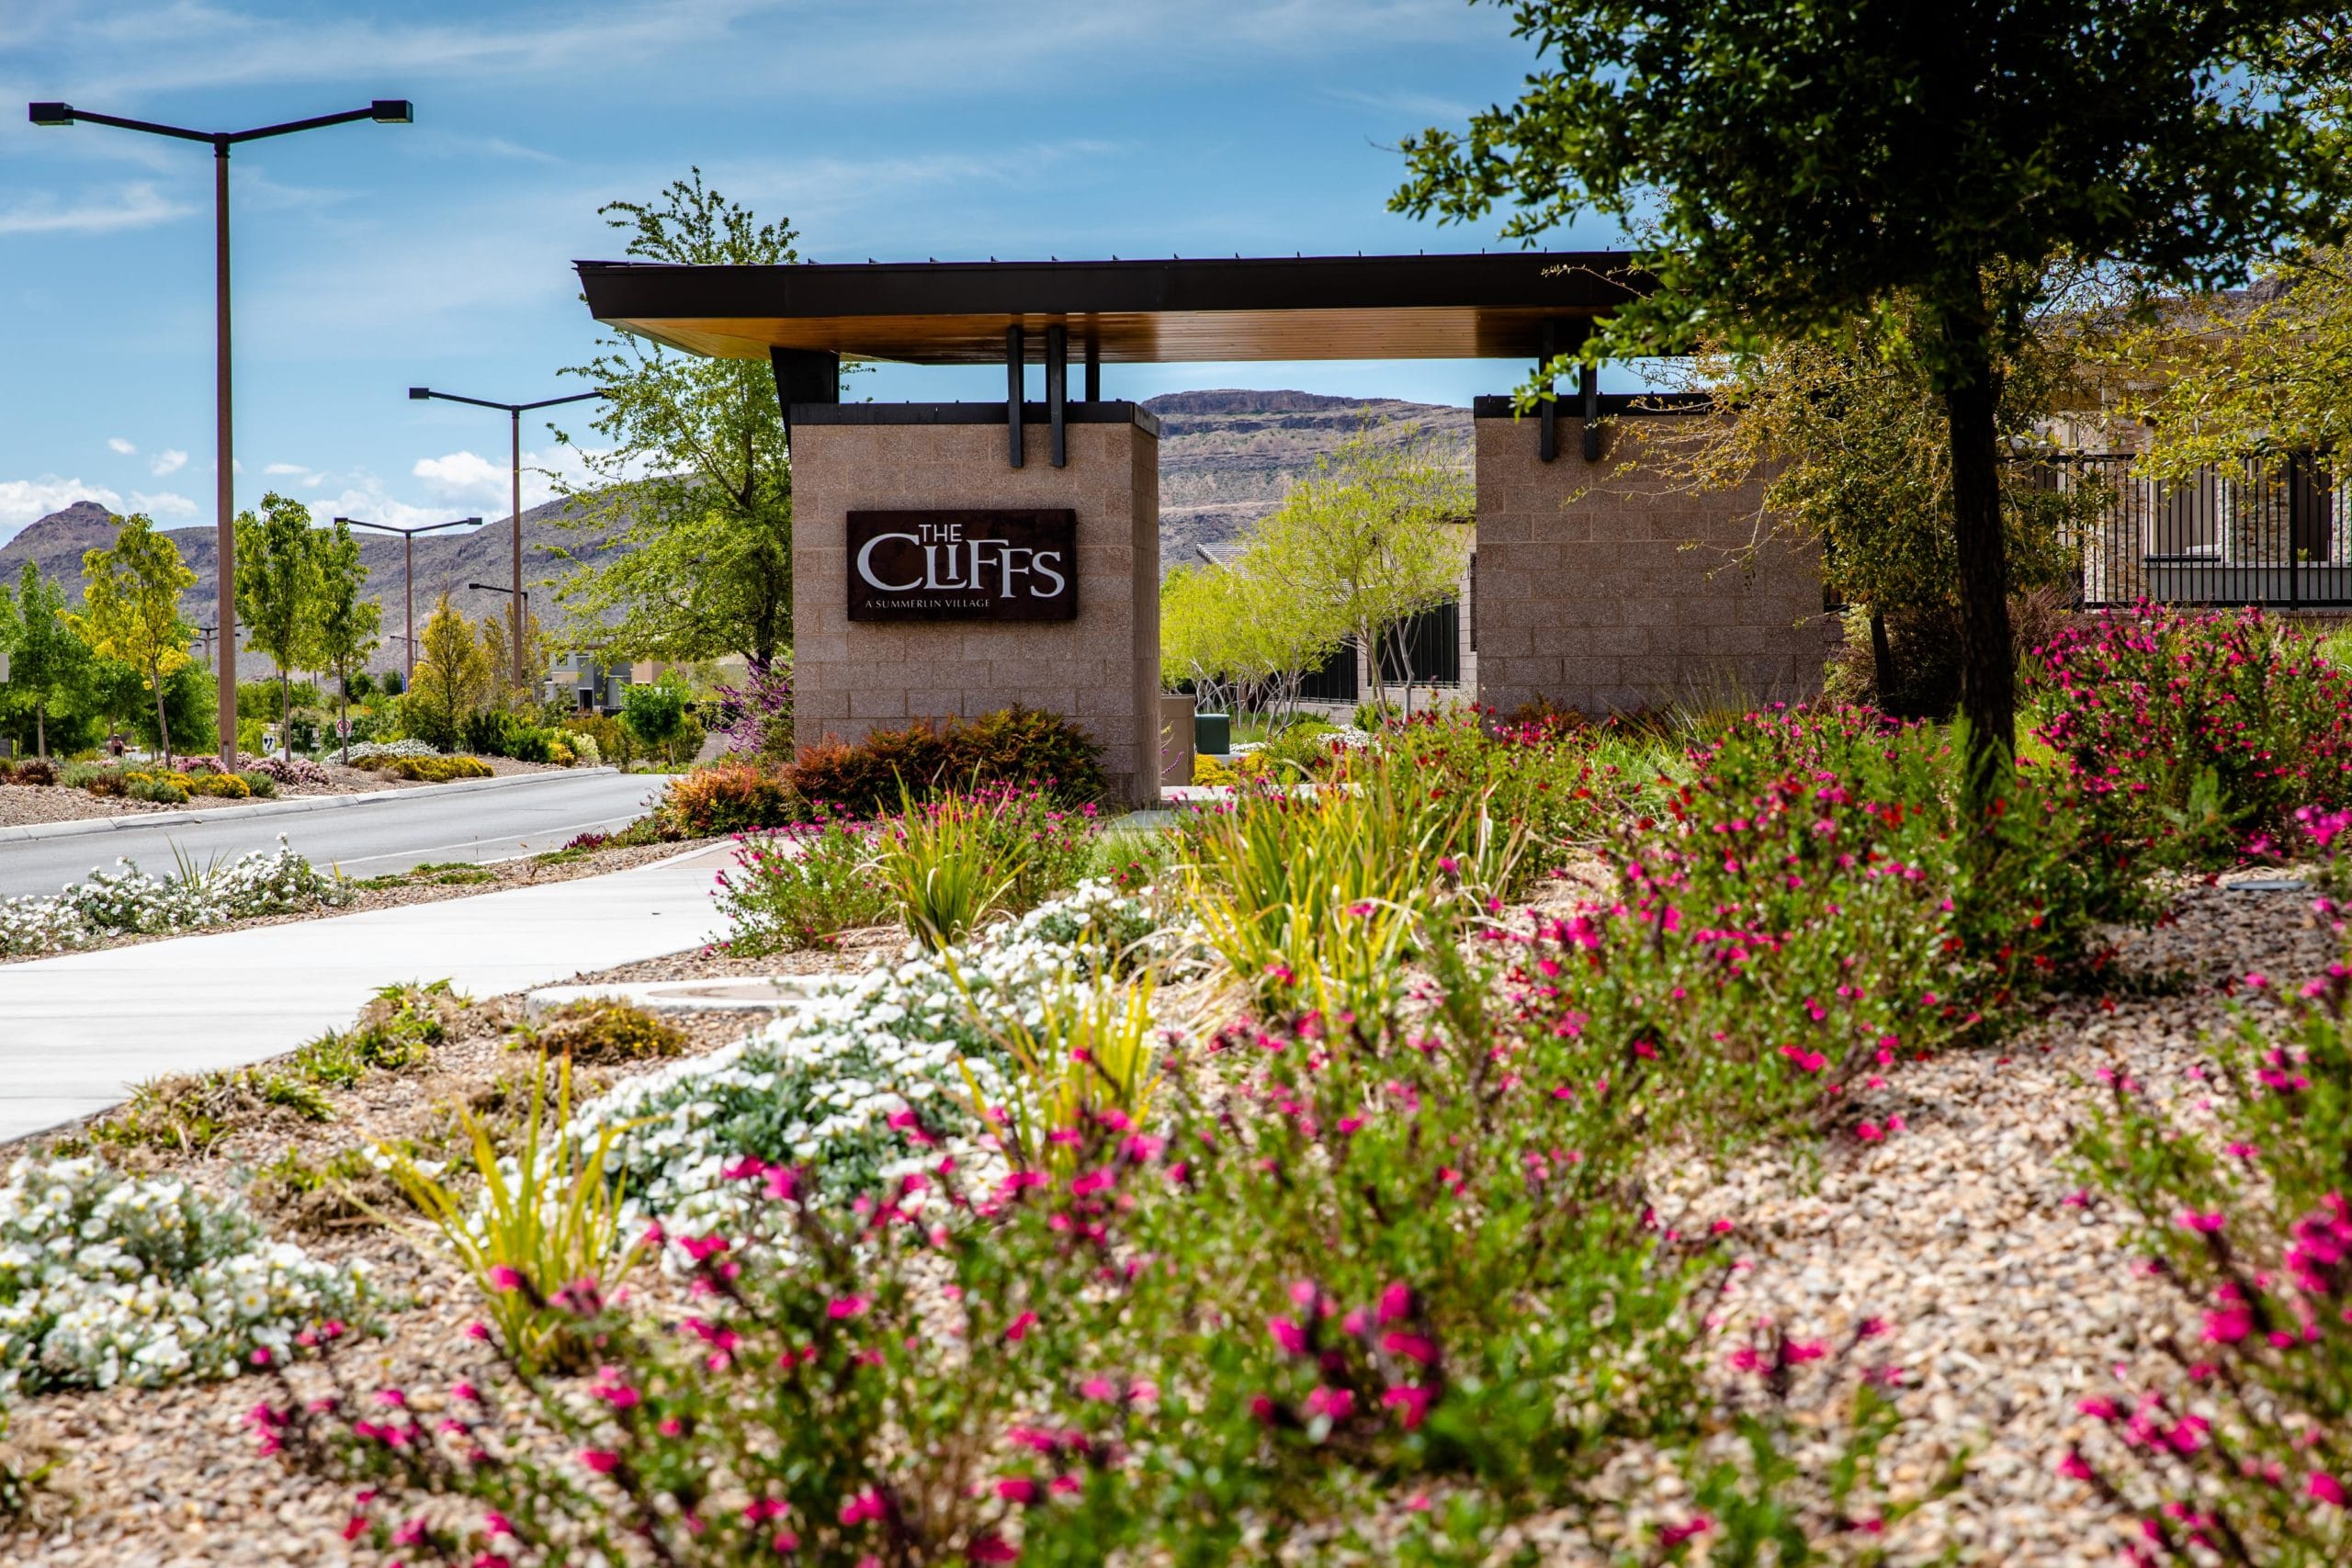 The Cliffs monument sign in Summerlin